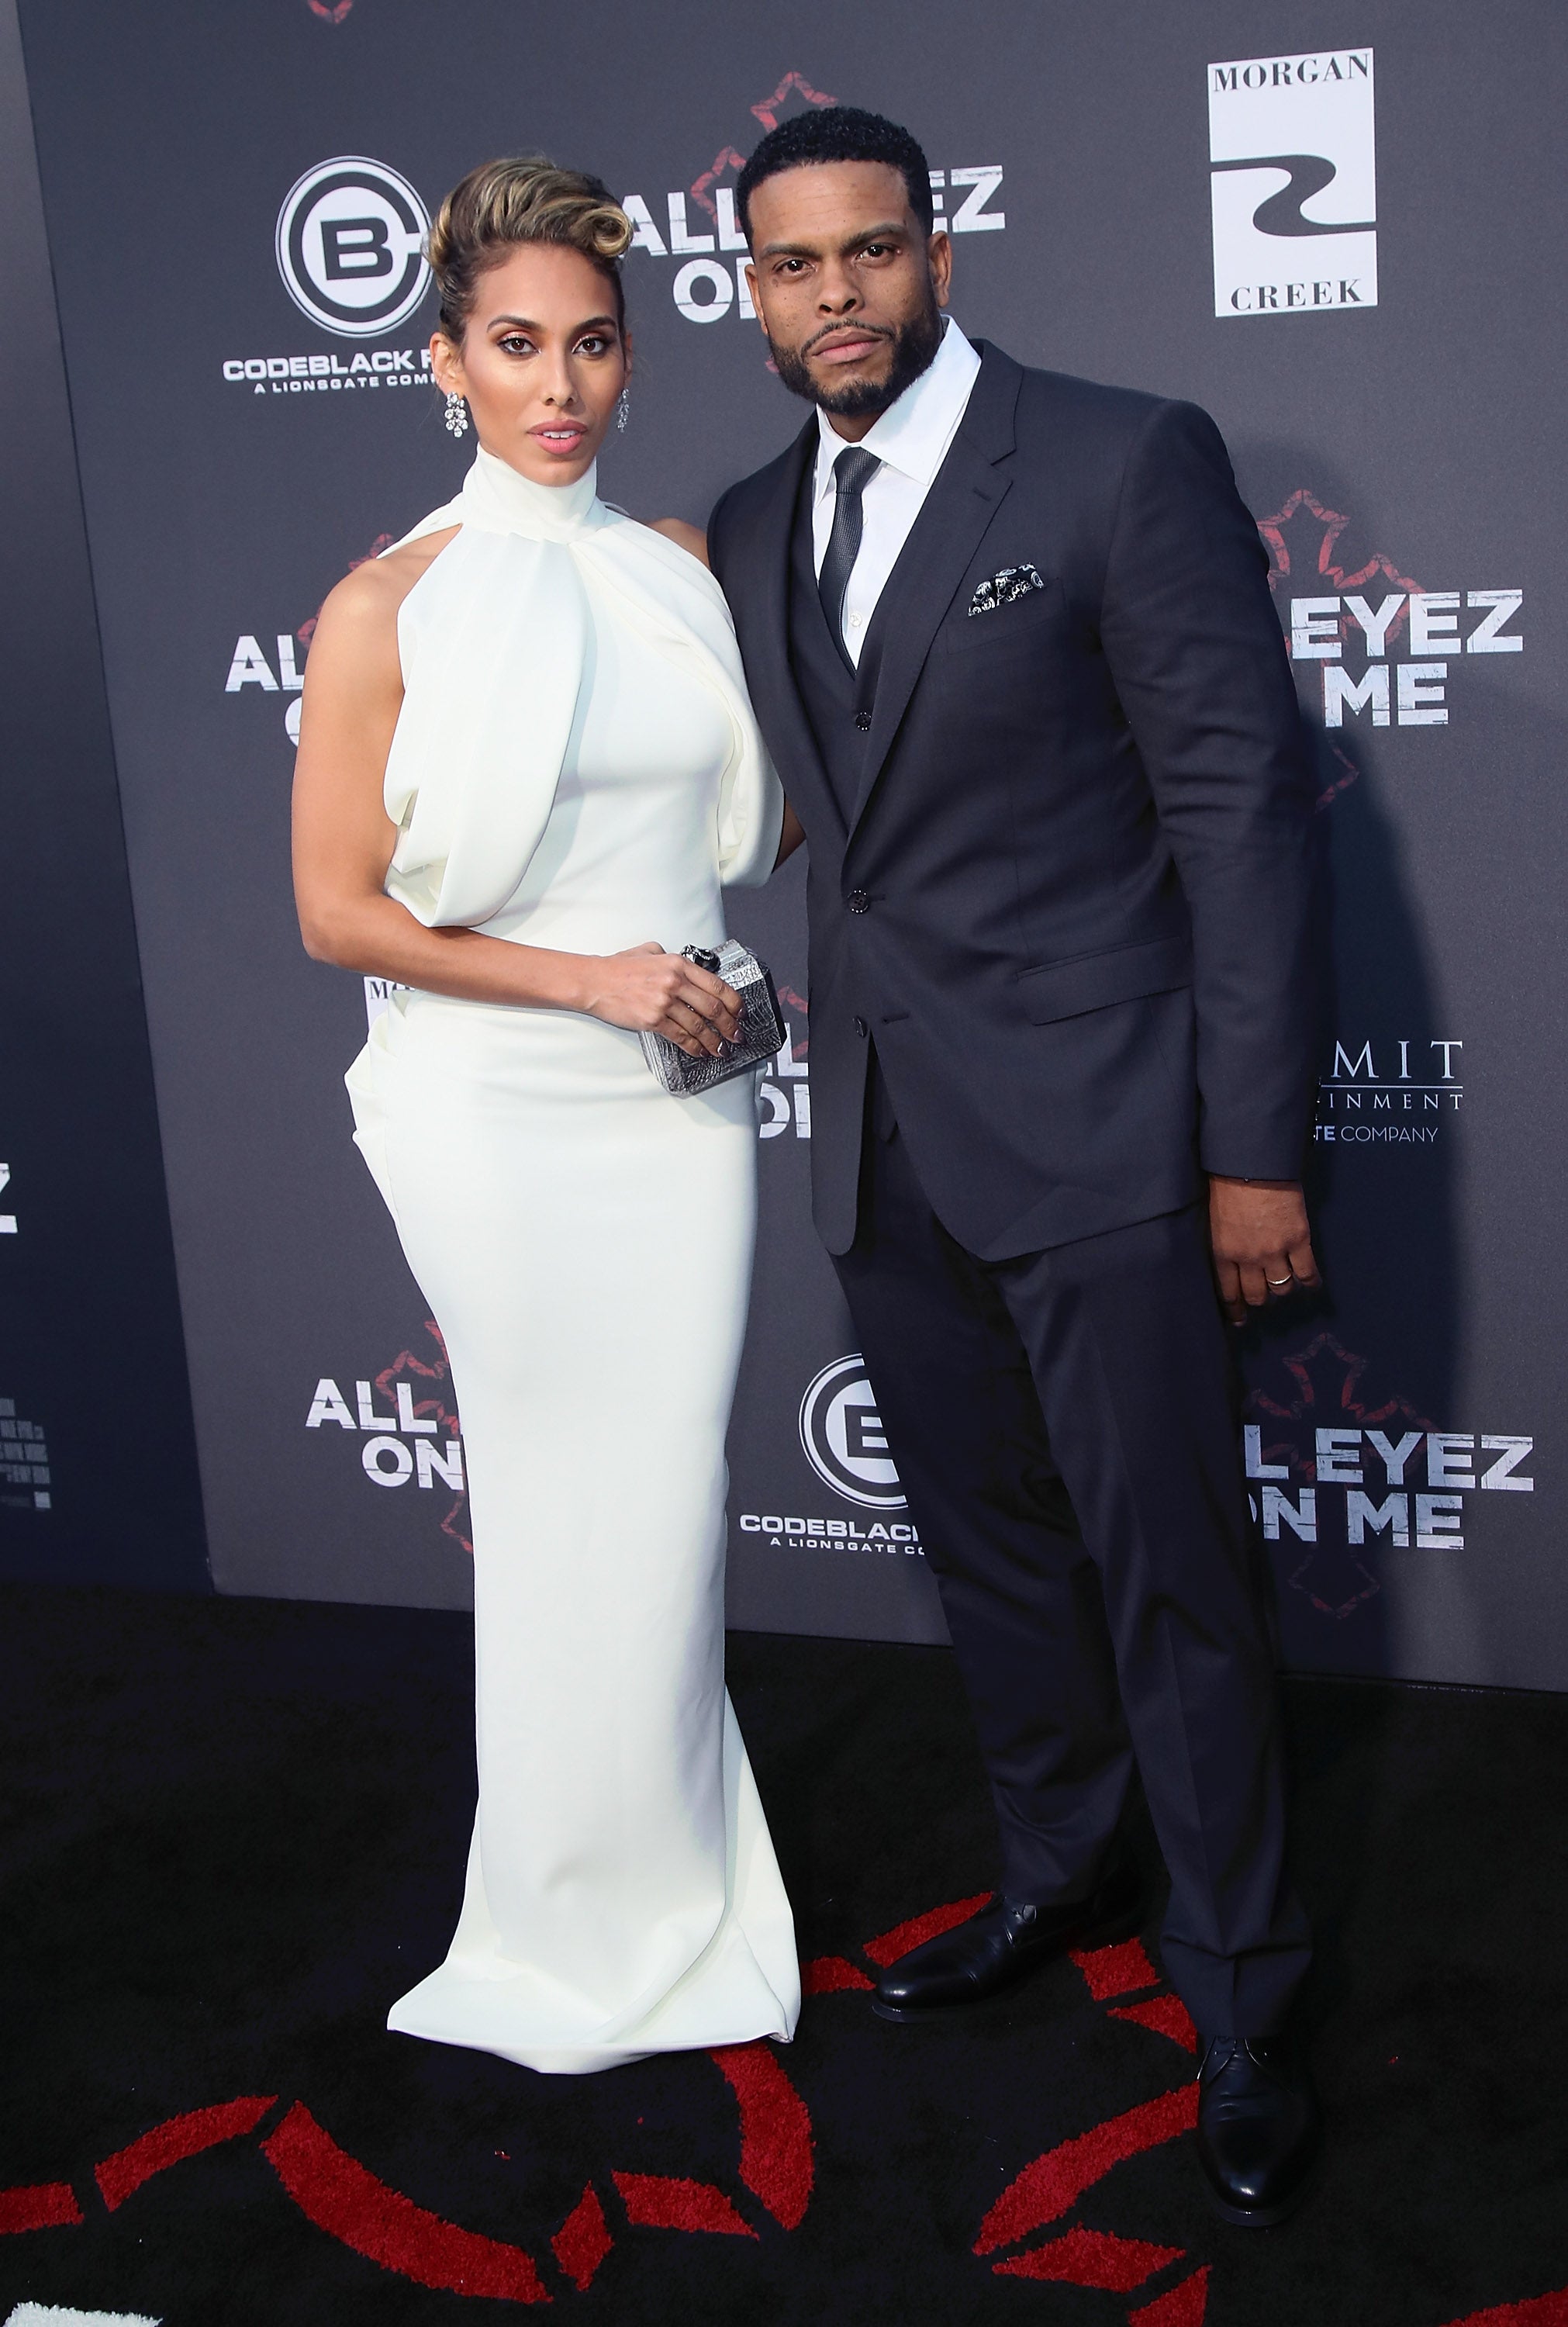 The 'All Eyez On Me' Premiere Was A Star-Studded Event
